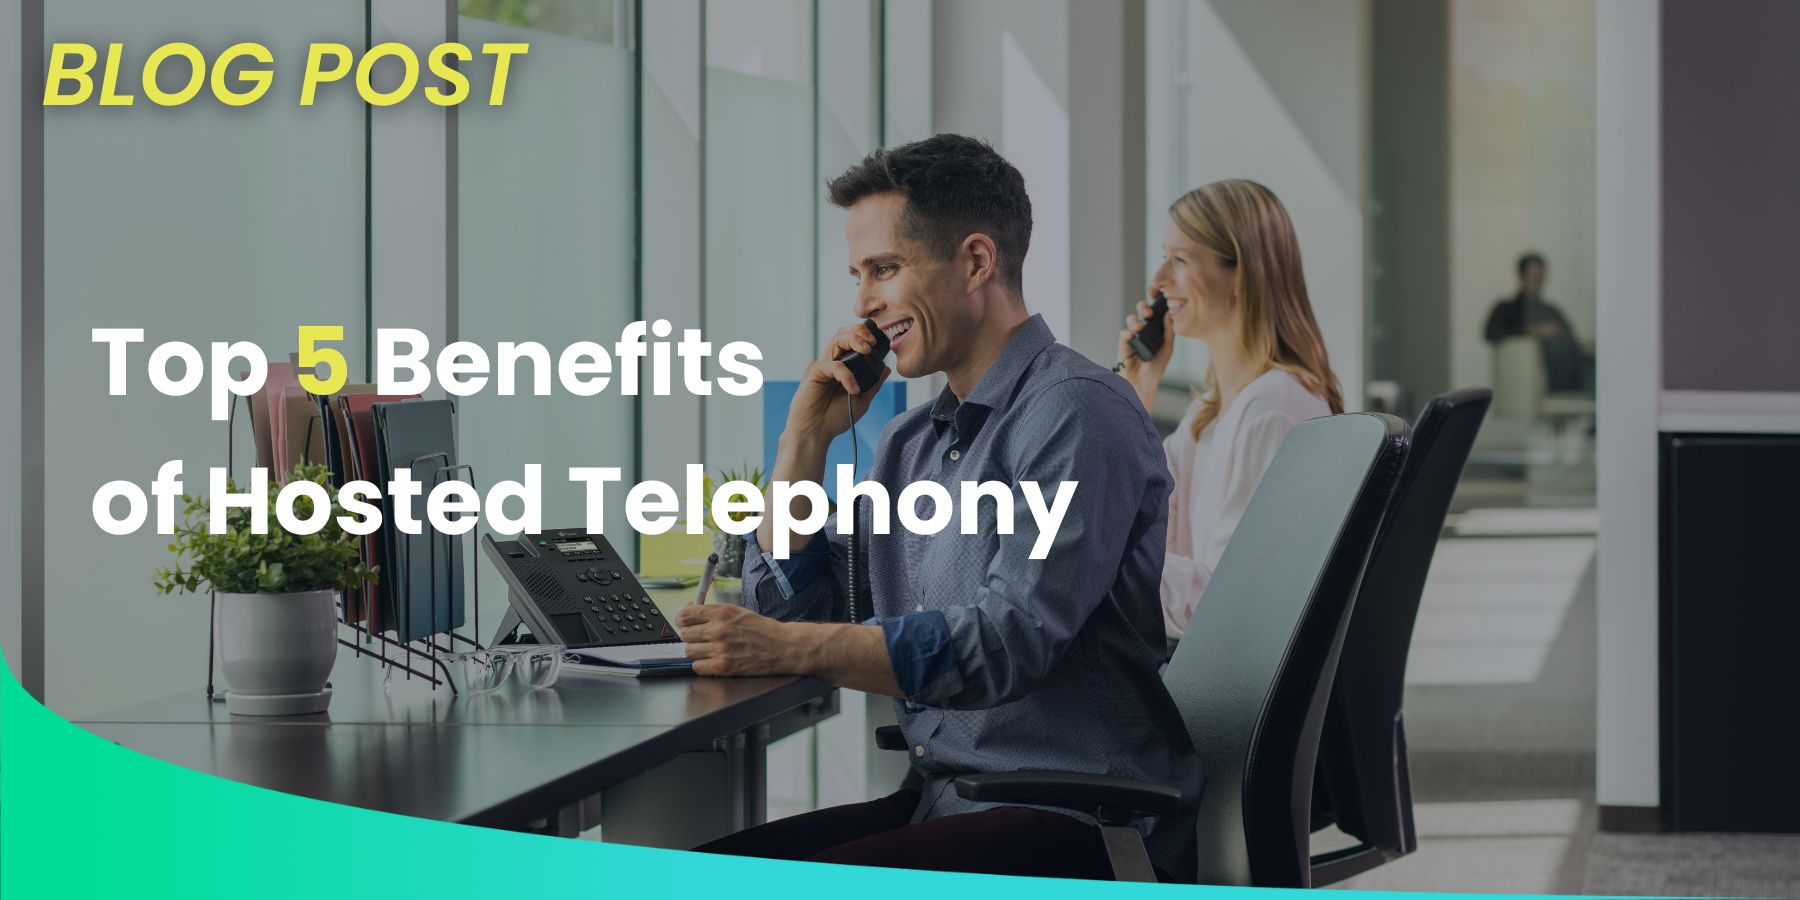 Top 5 Benefits of hosted telephony blog